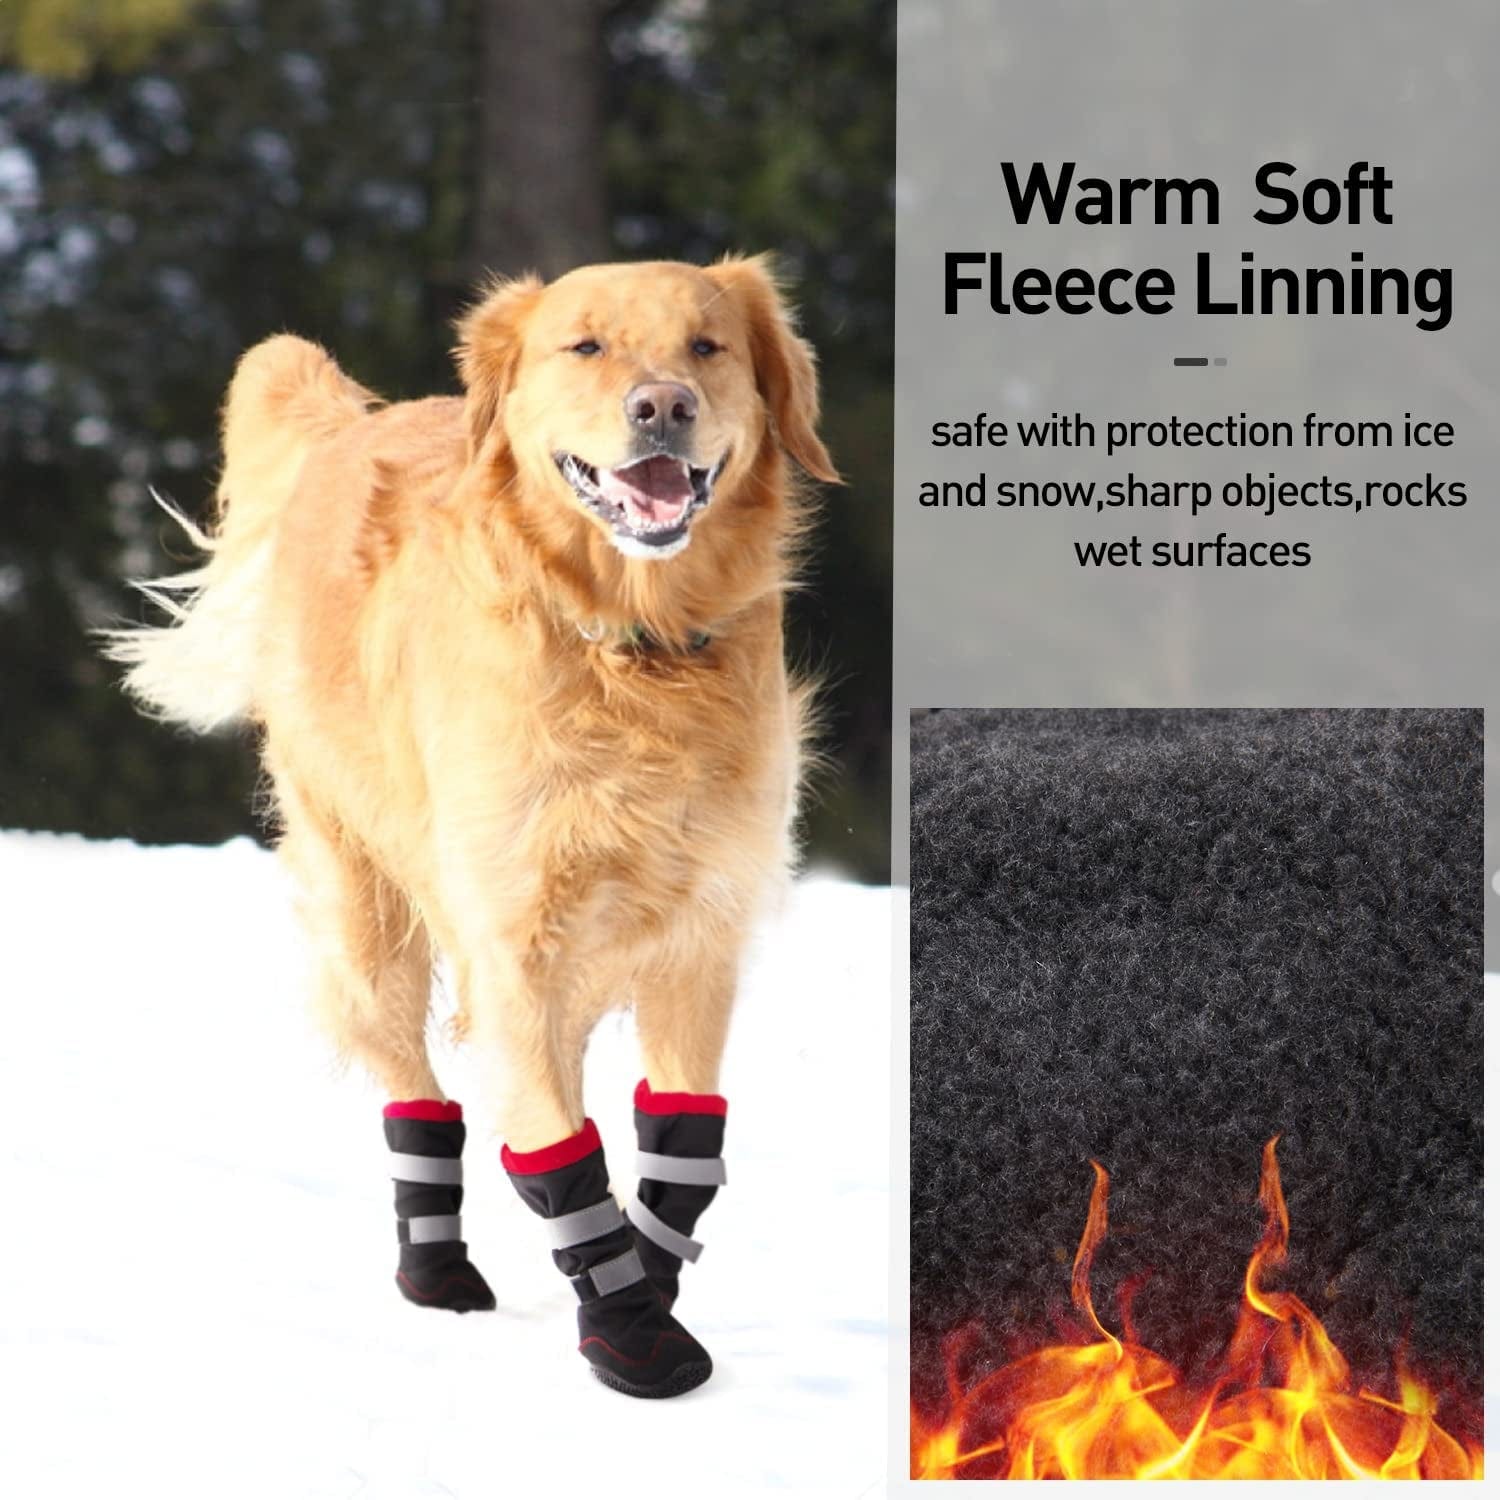 Warm Dog Boots - Fleece Lined Dog Shoes for Medium Large Dogs with Drawstring - Winter Dog Snow Boots with Anti-Slip Rugged Sole - Reflective Waterproof Dog Booties for Walking Hiking Running Outdoor